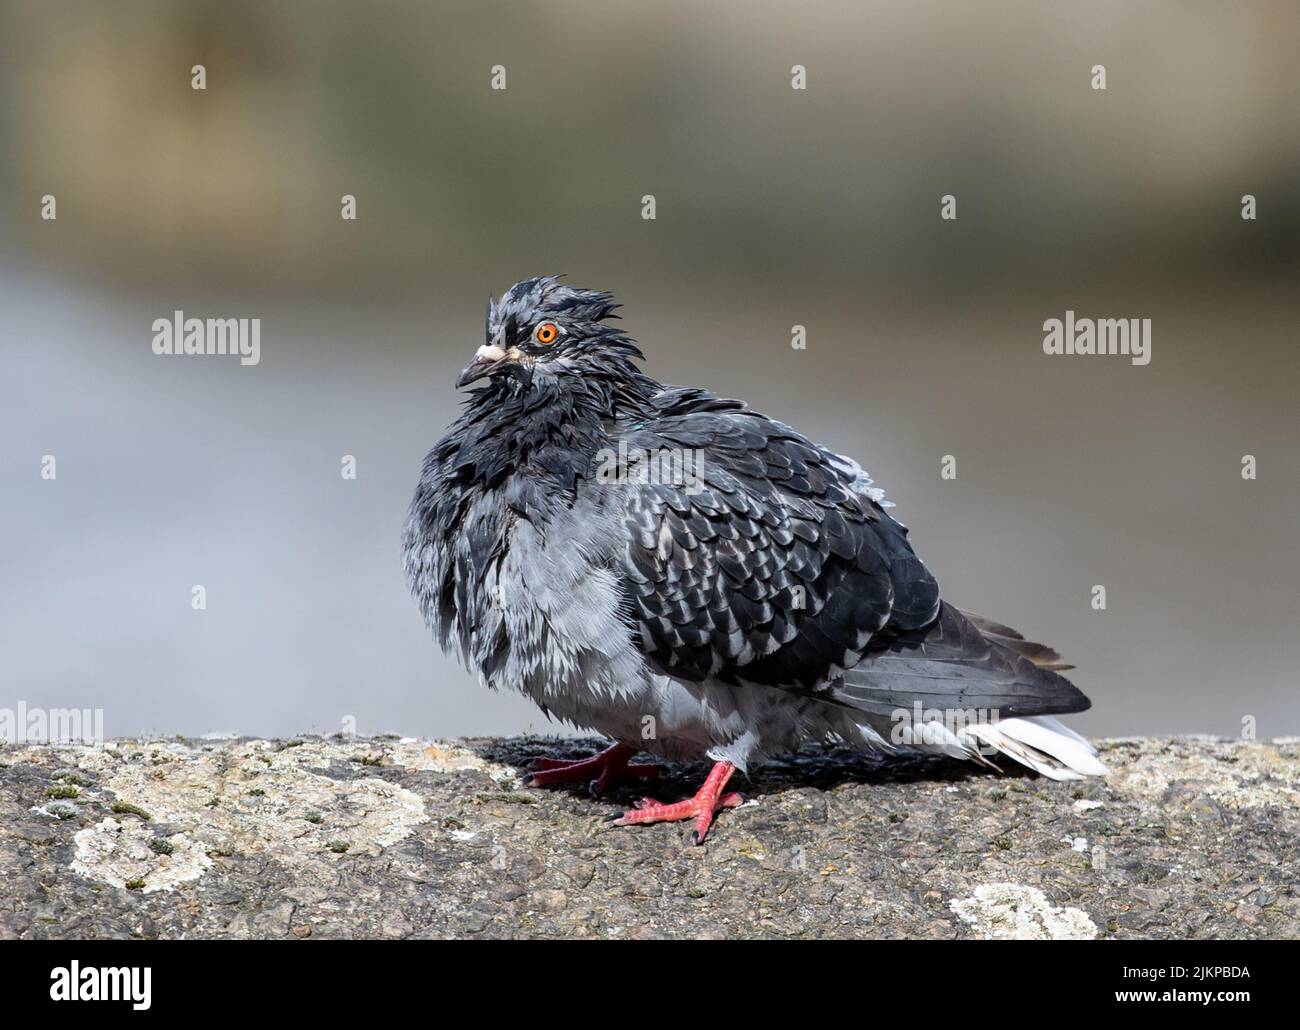 A close-up shot of a Rock dove with wet feathers standing on a rock and drying its feathers at the sun Stock Photo